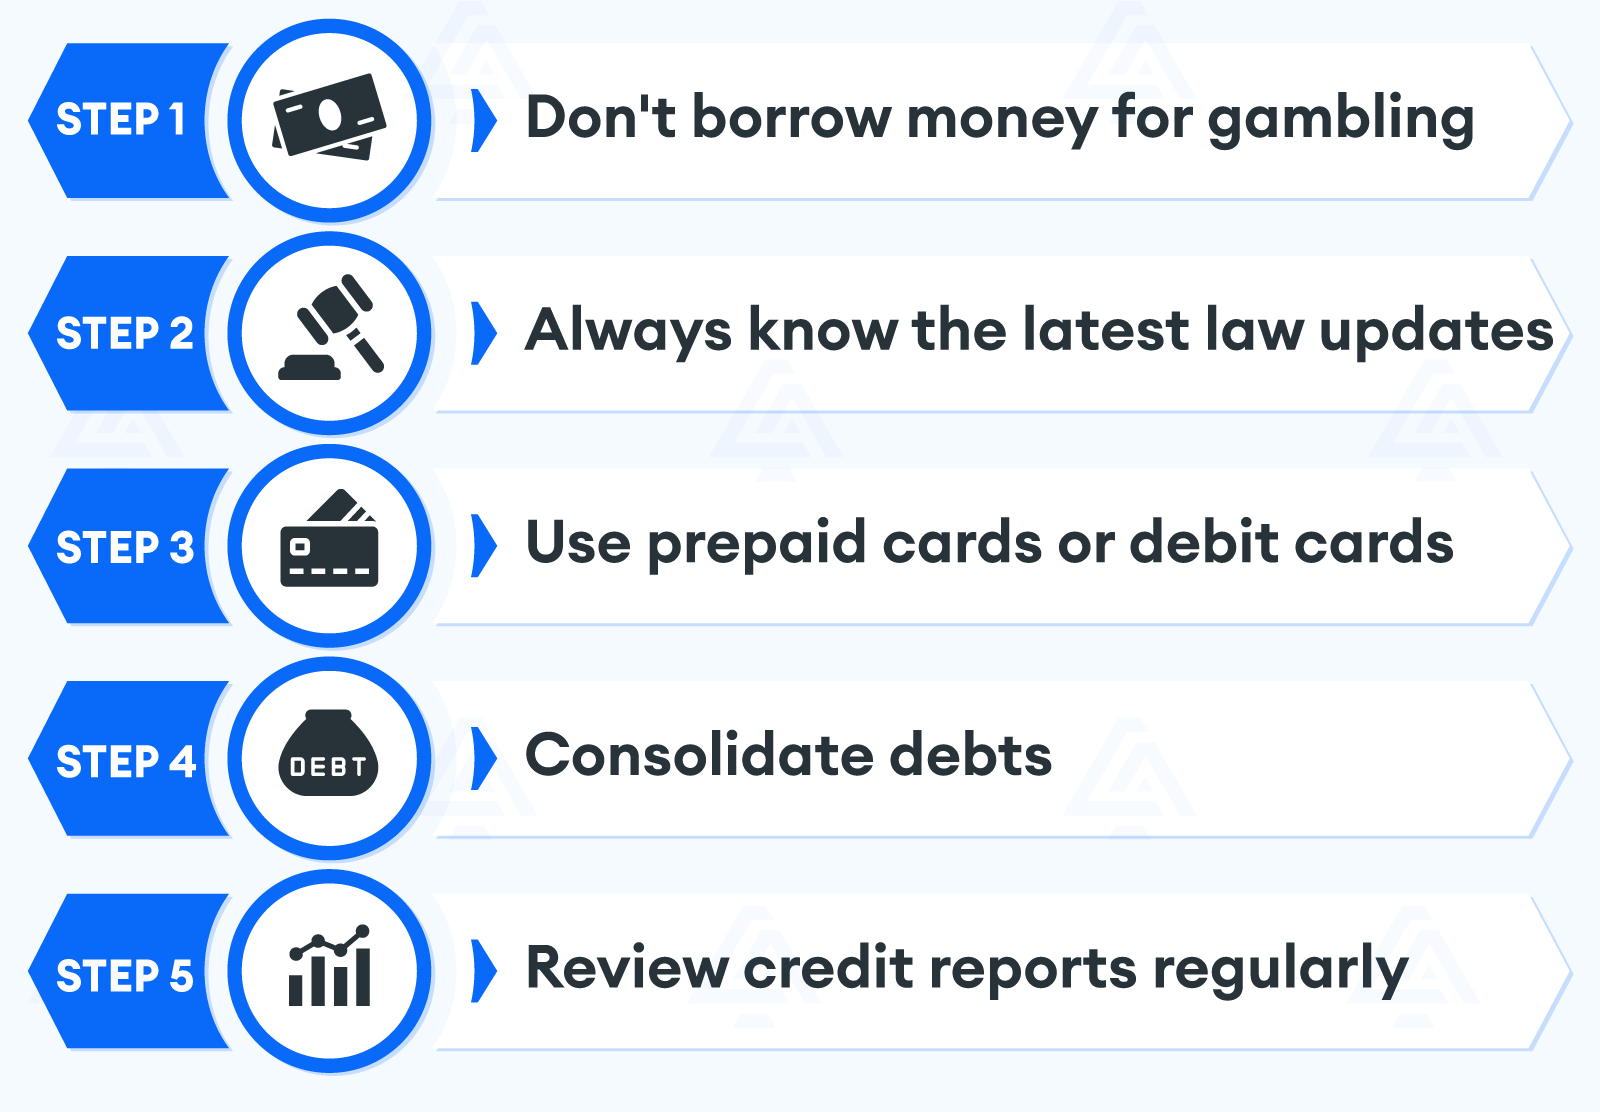 Steps-to-maintain-your-credit-score-and-gamble